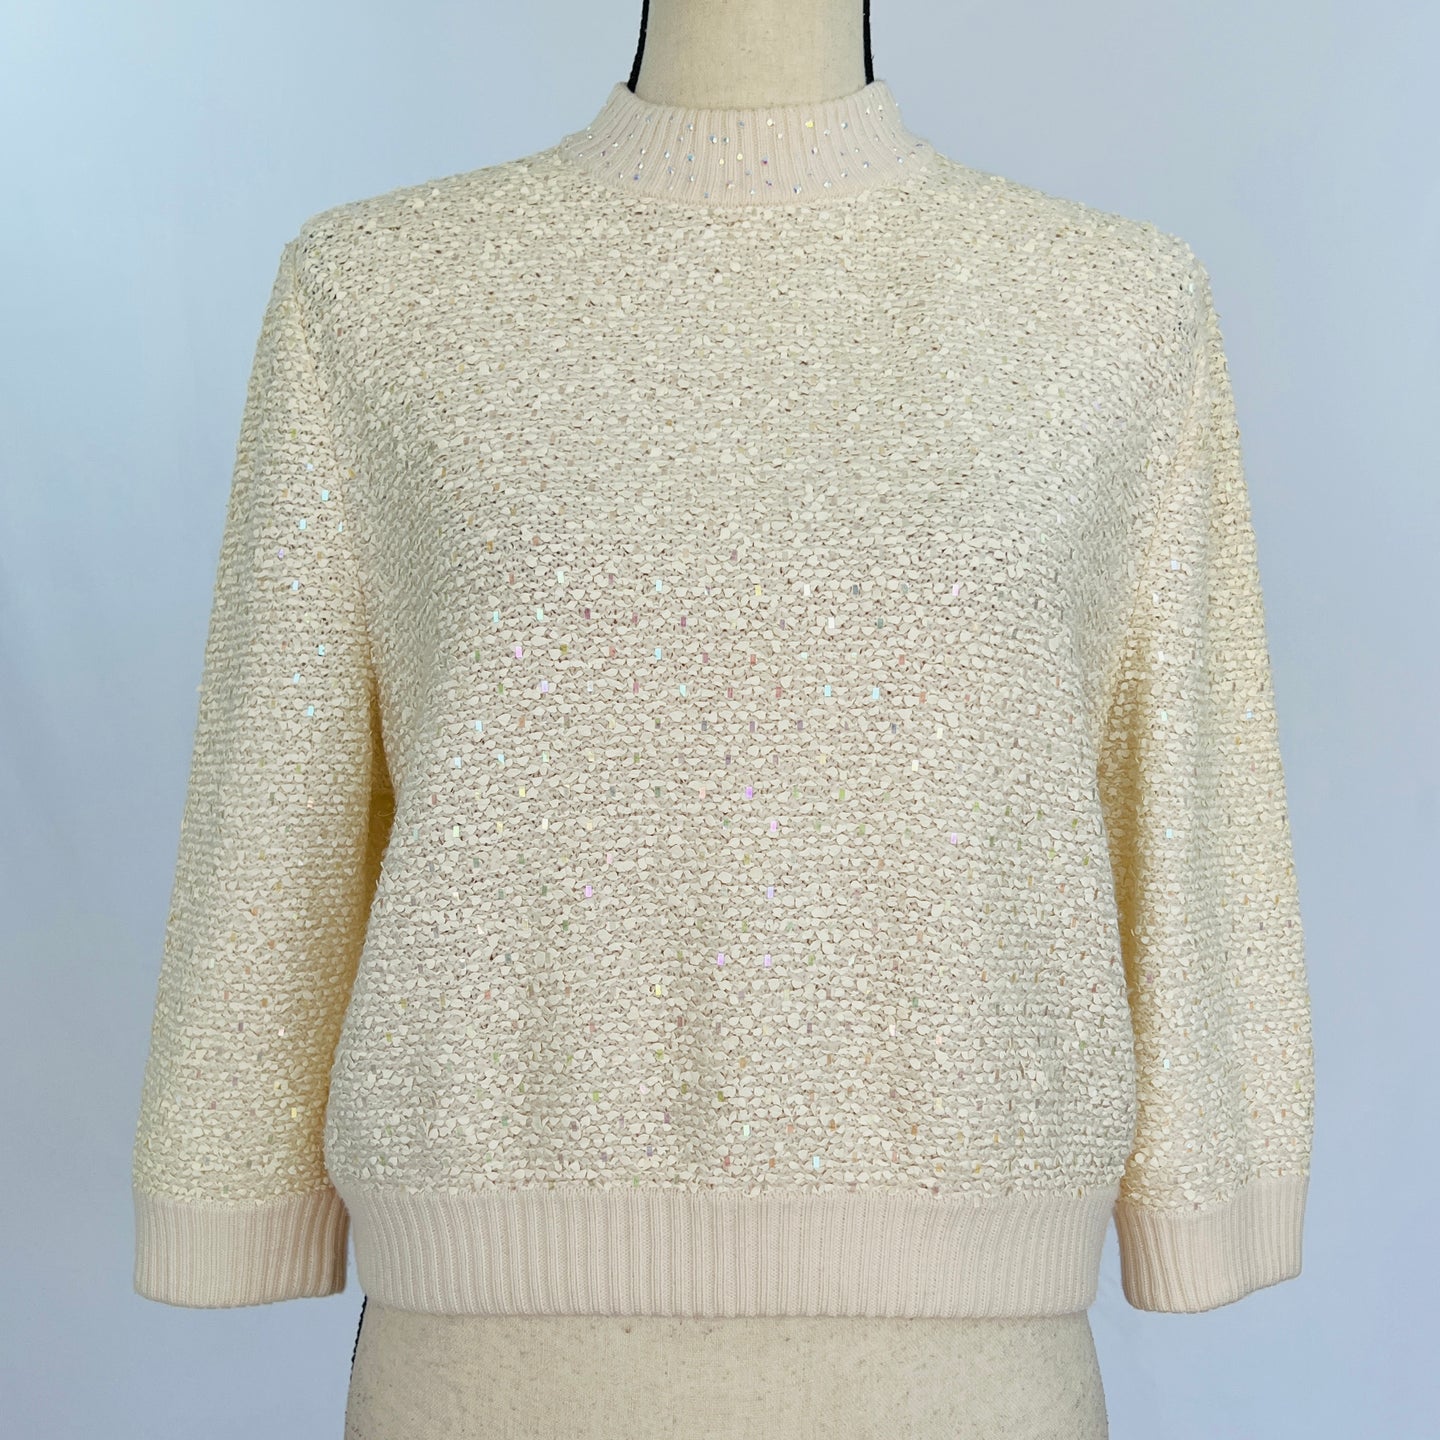 St John Evening Sequin Knit Ivory Pullover Sweater Size 10